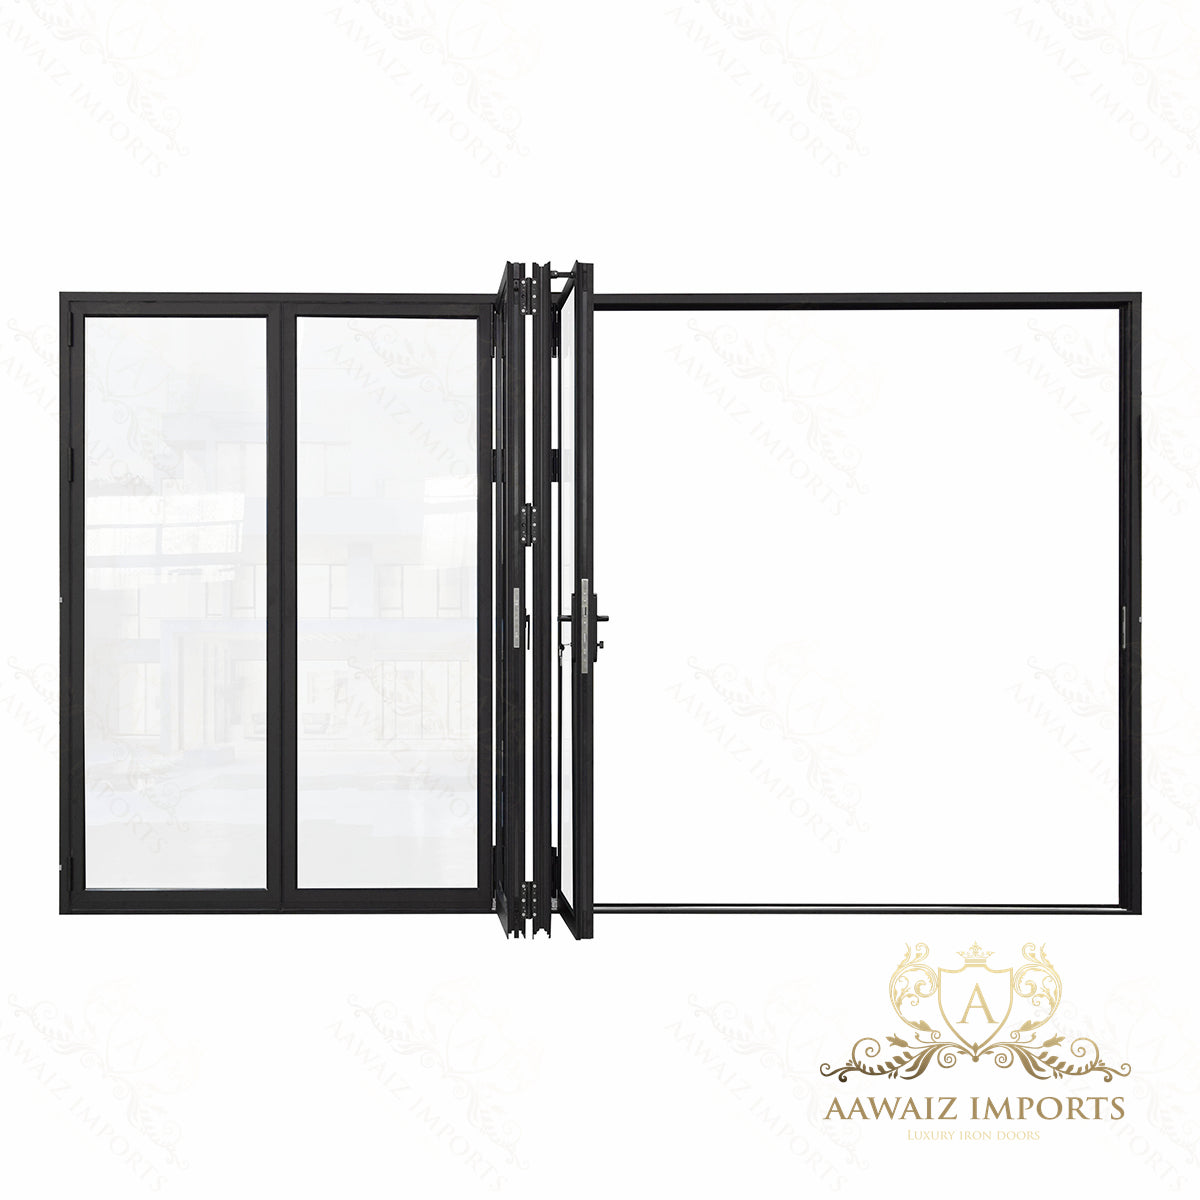 14 Ft Wide By 7 Ft Tall (168" By 84") Aluminum Bi Fold Patio Door  Outswing  Thermal Break Insulated Matt Black Finish